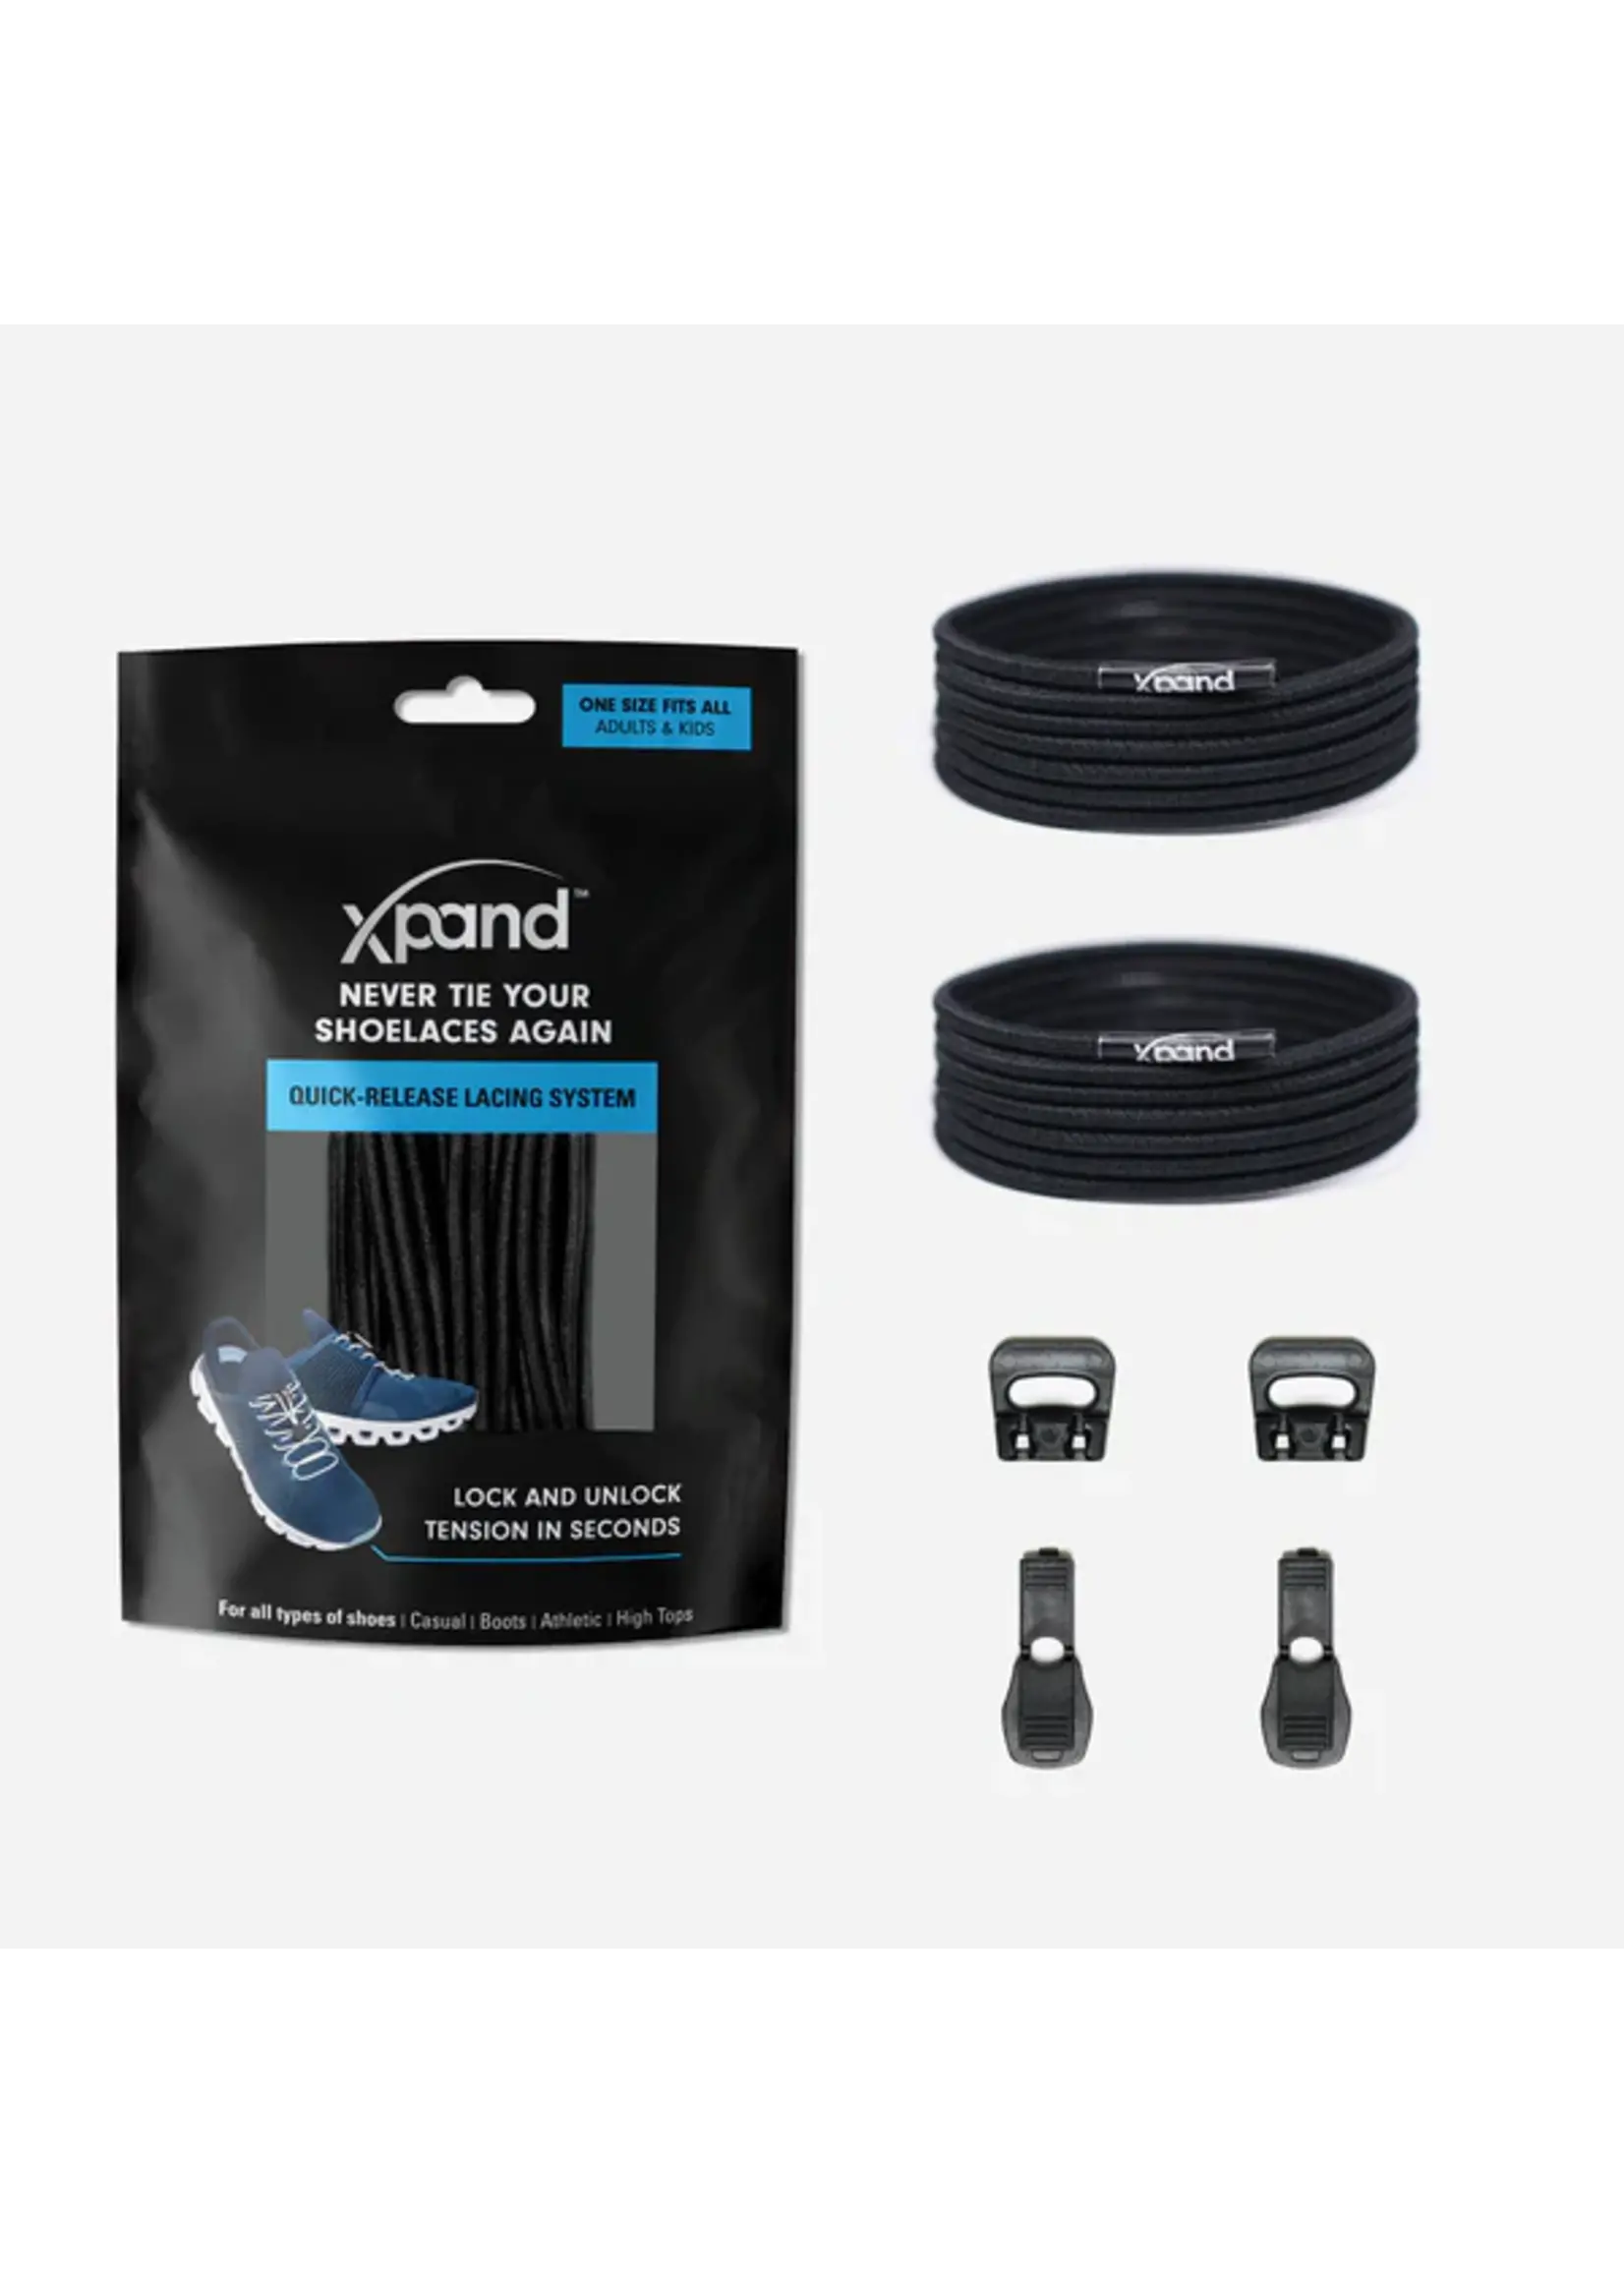 Xpand Laces Round Quick-Release Lacing System